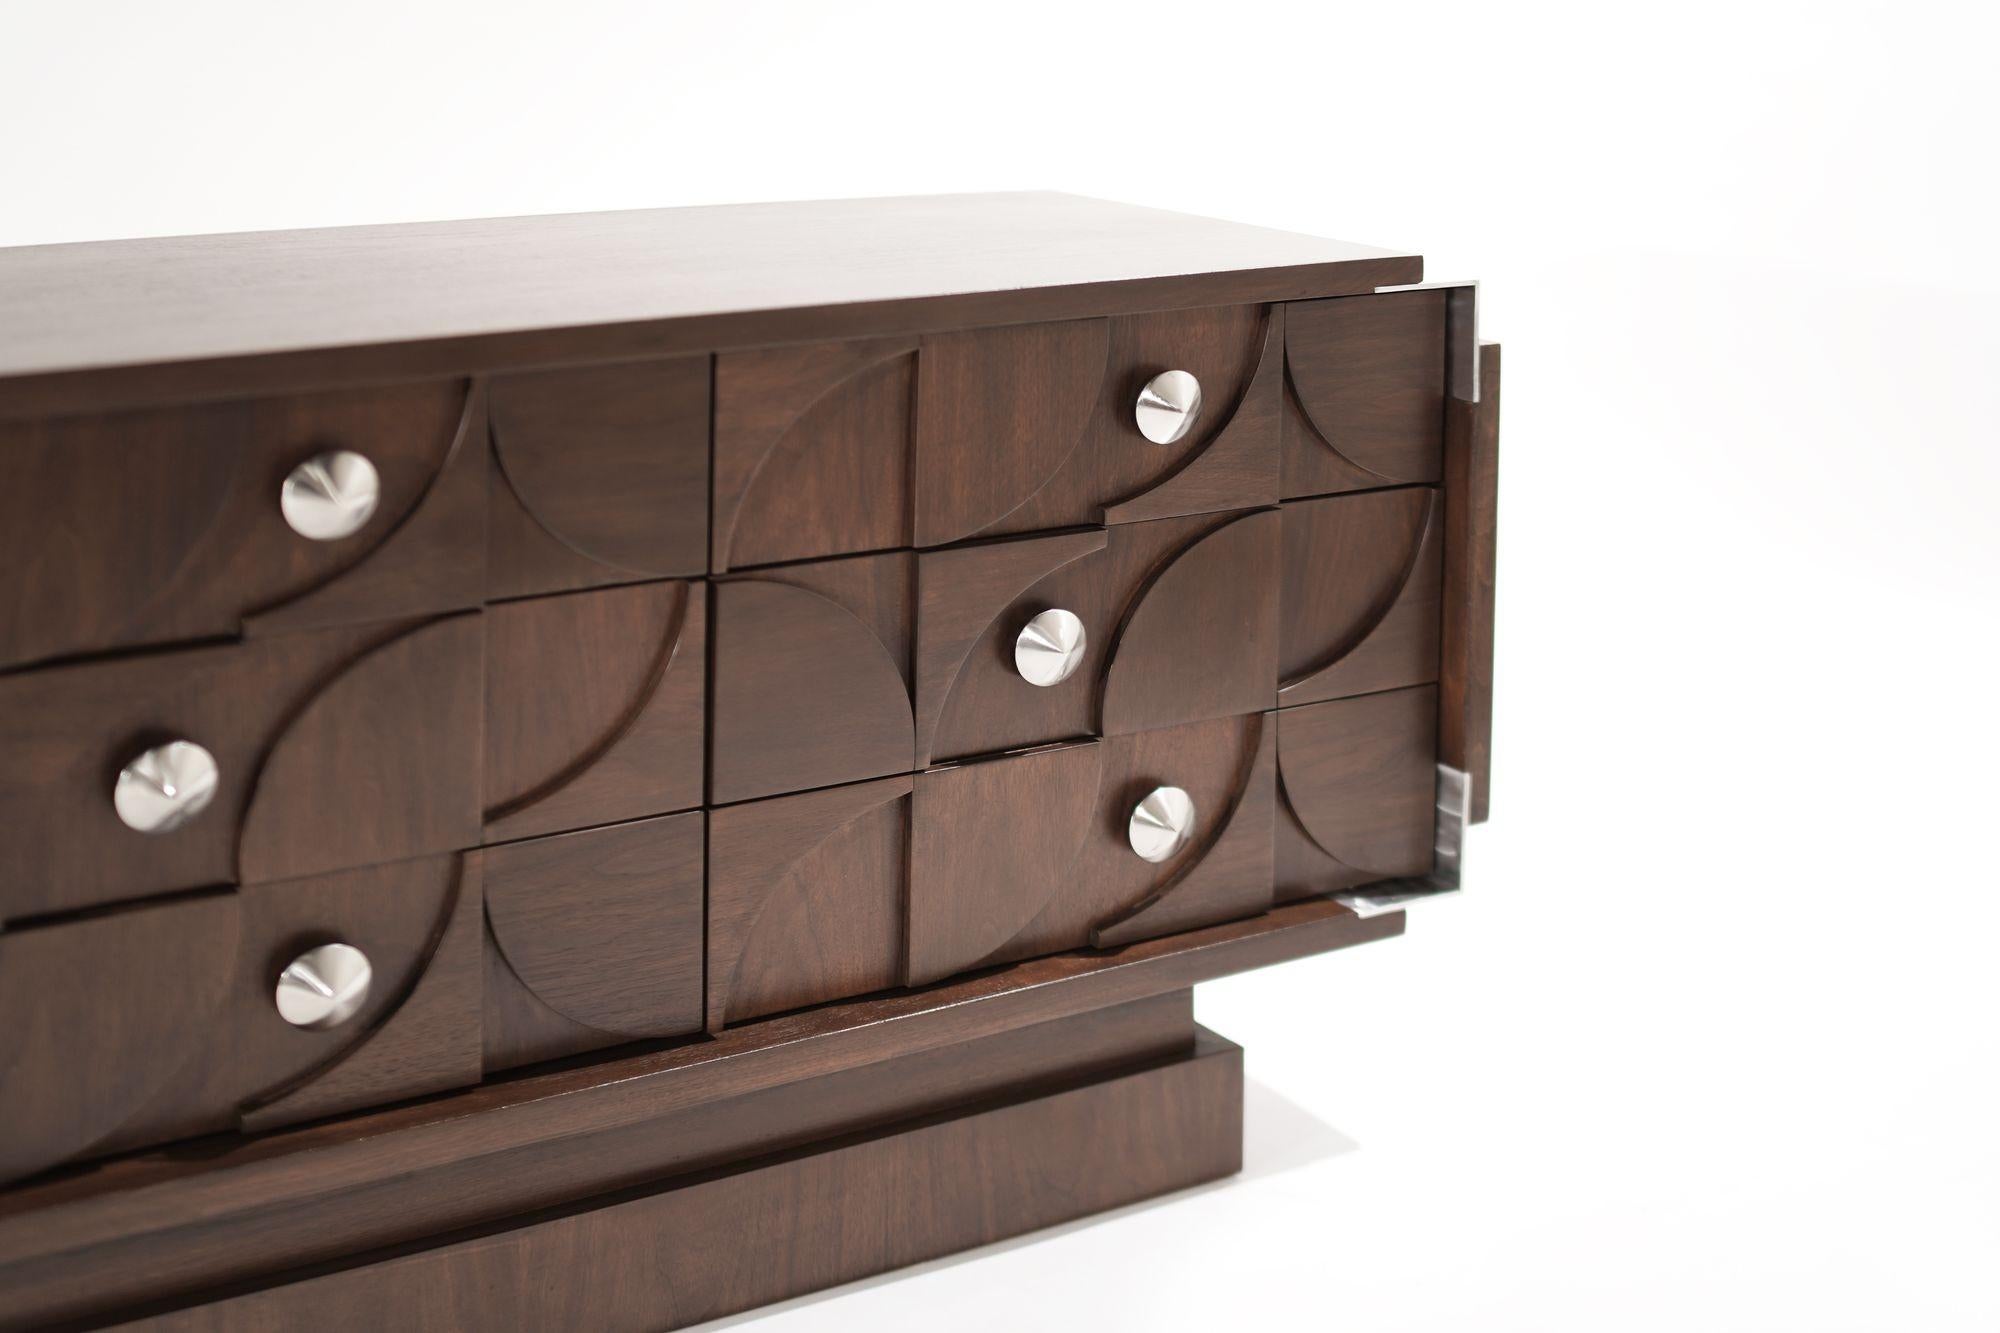 Brutalist Walnut Dresser with Nickel Accents, C. 1960s For Sale 2